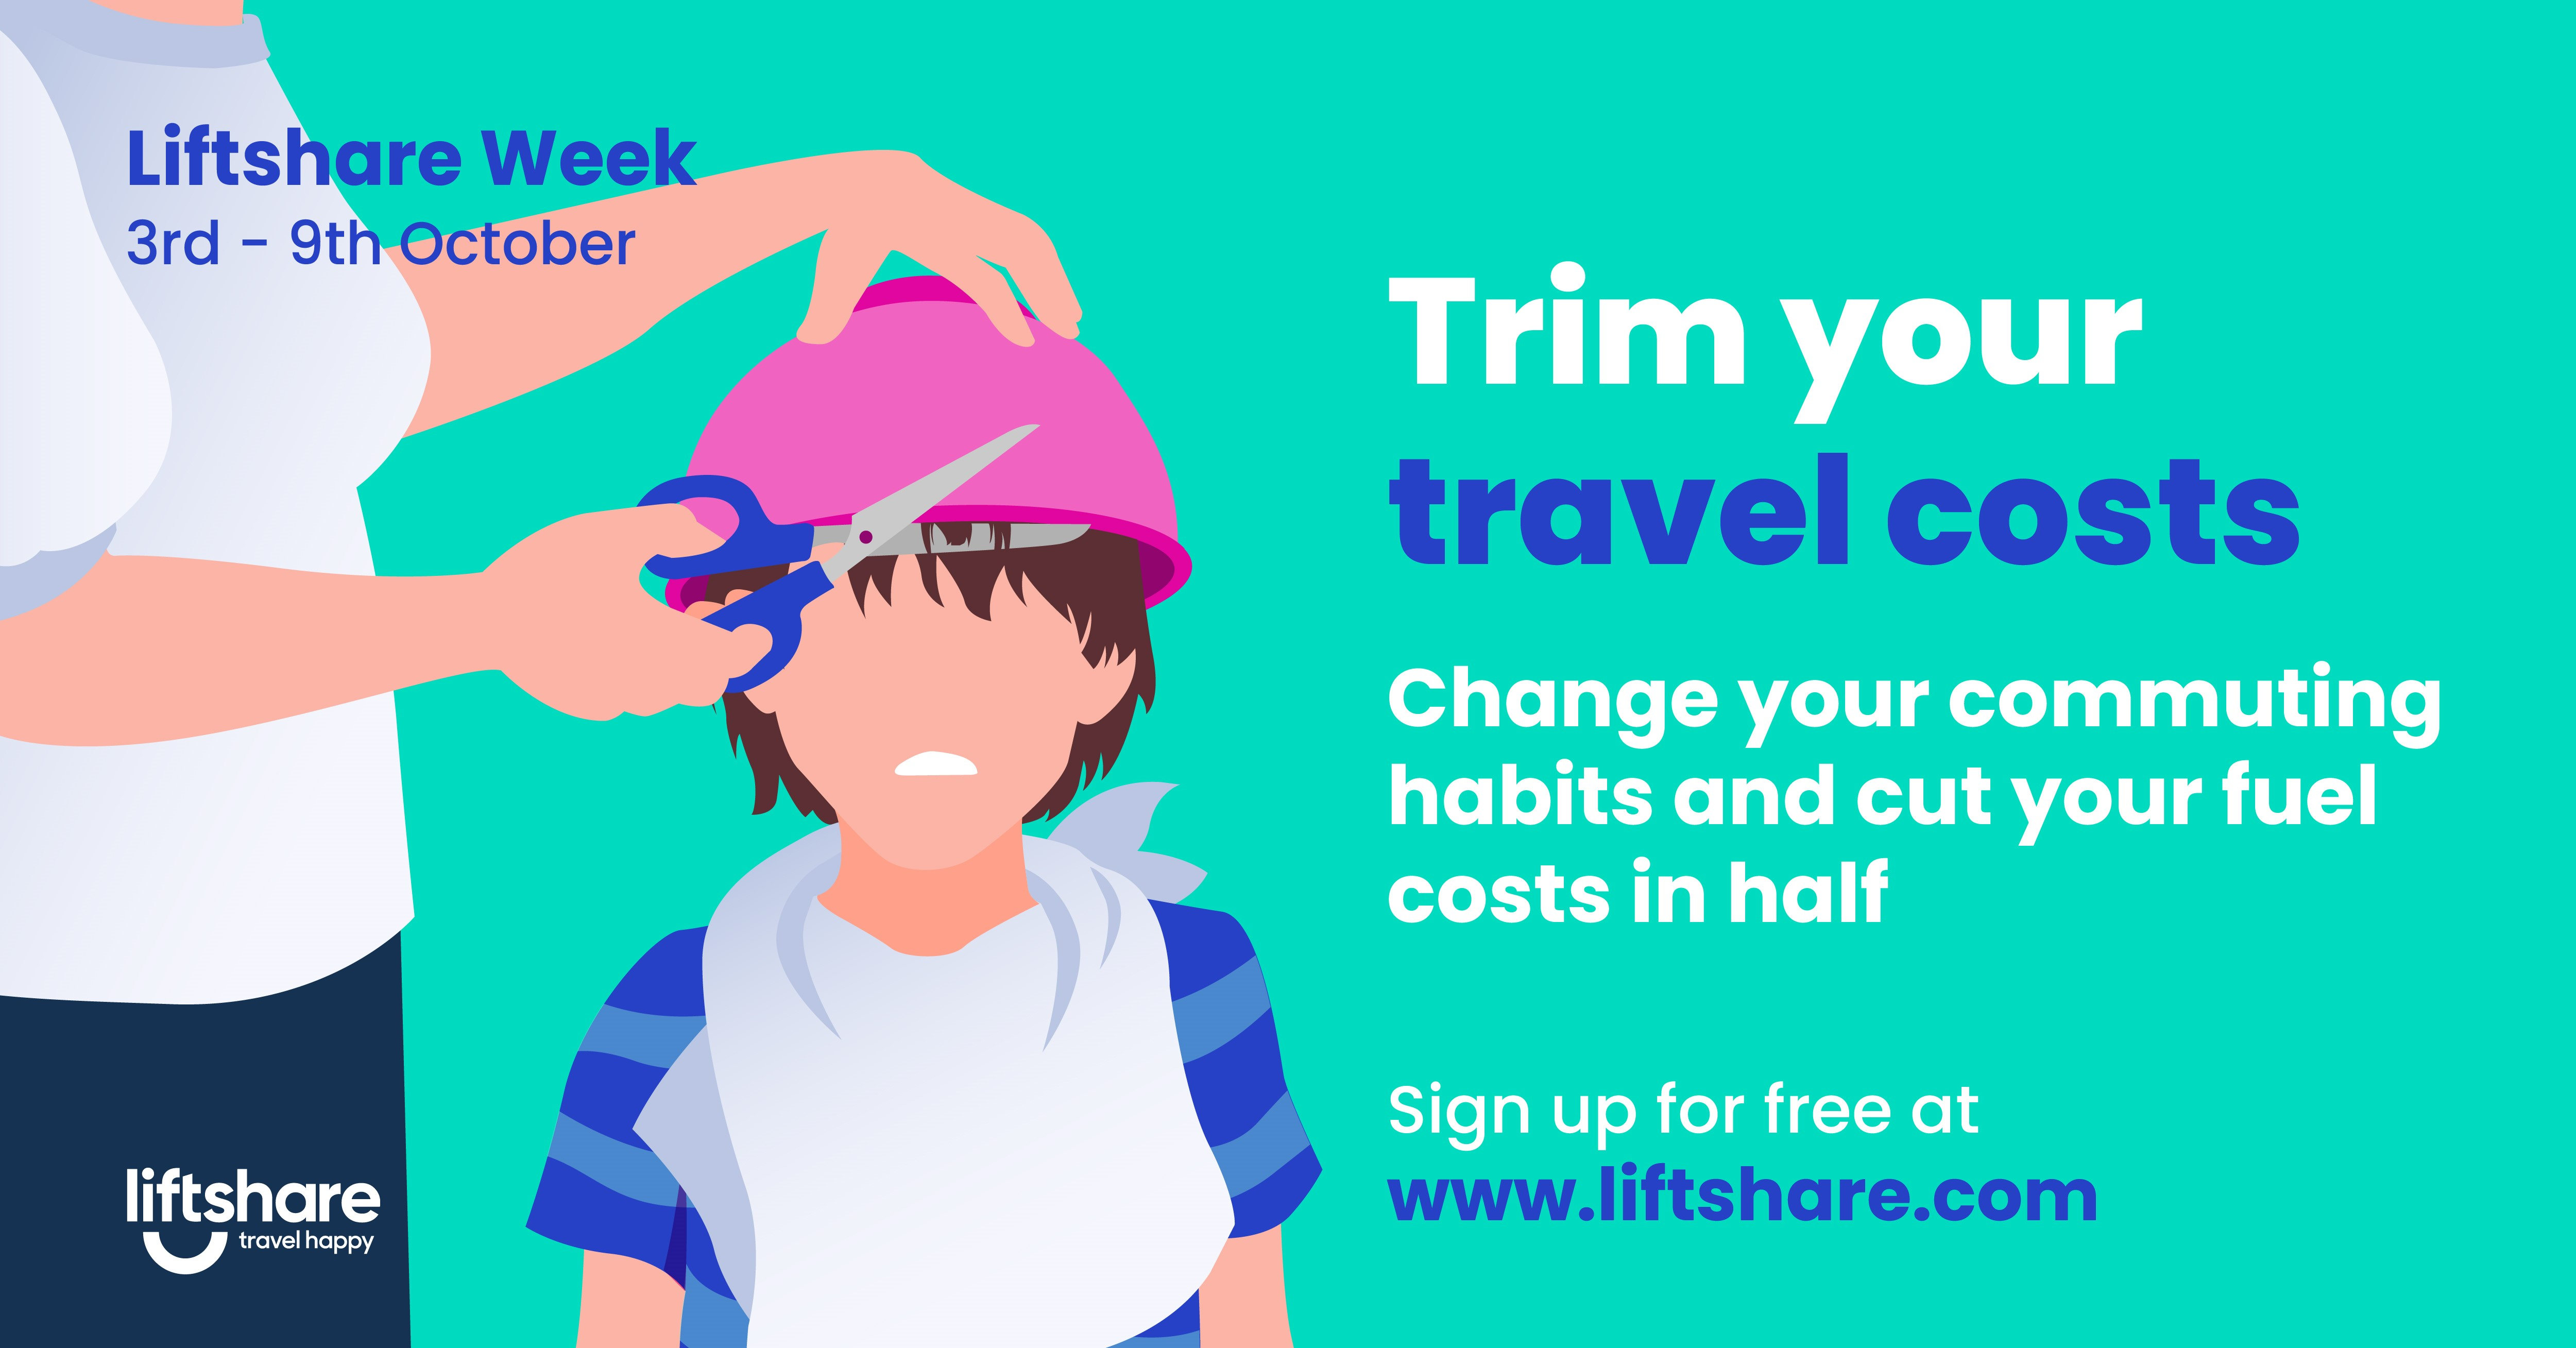 Liftshare week 3rd – 9th October